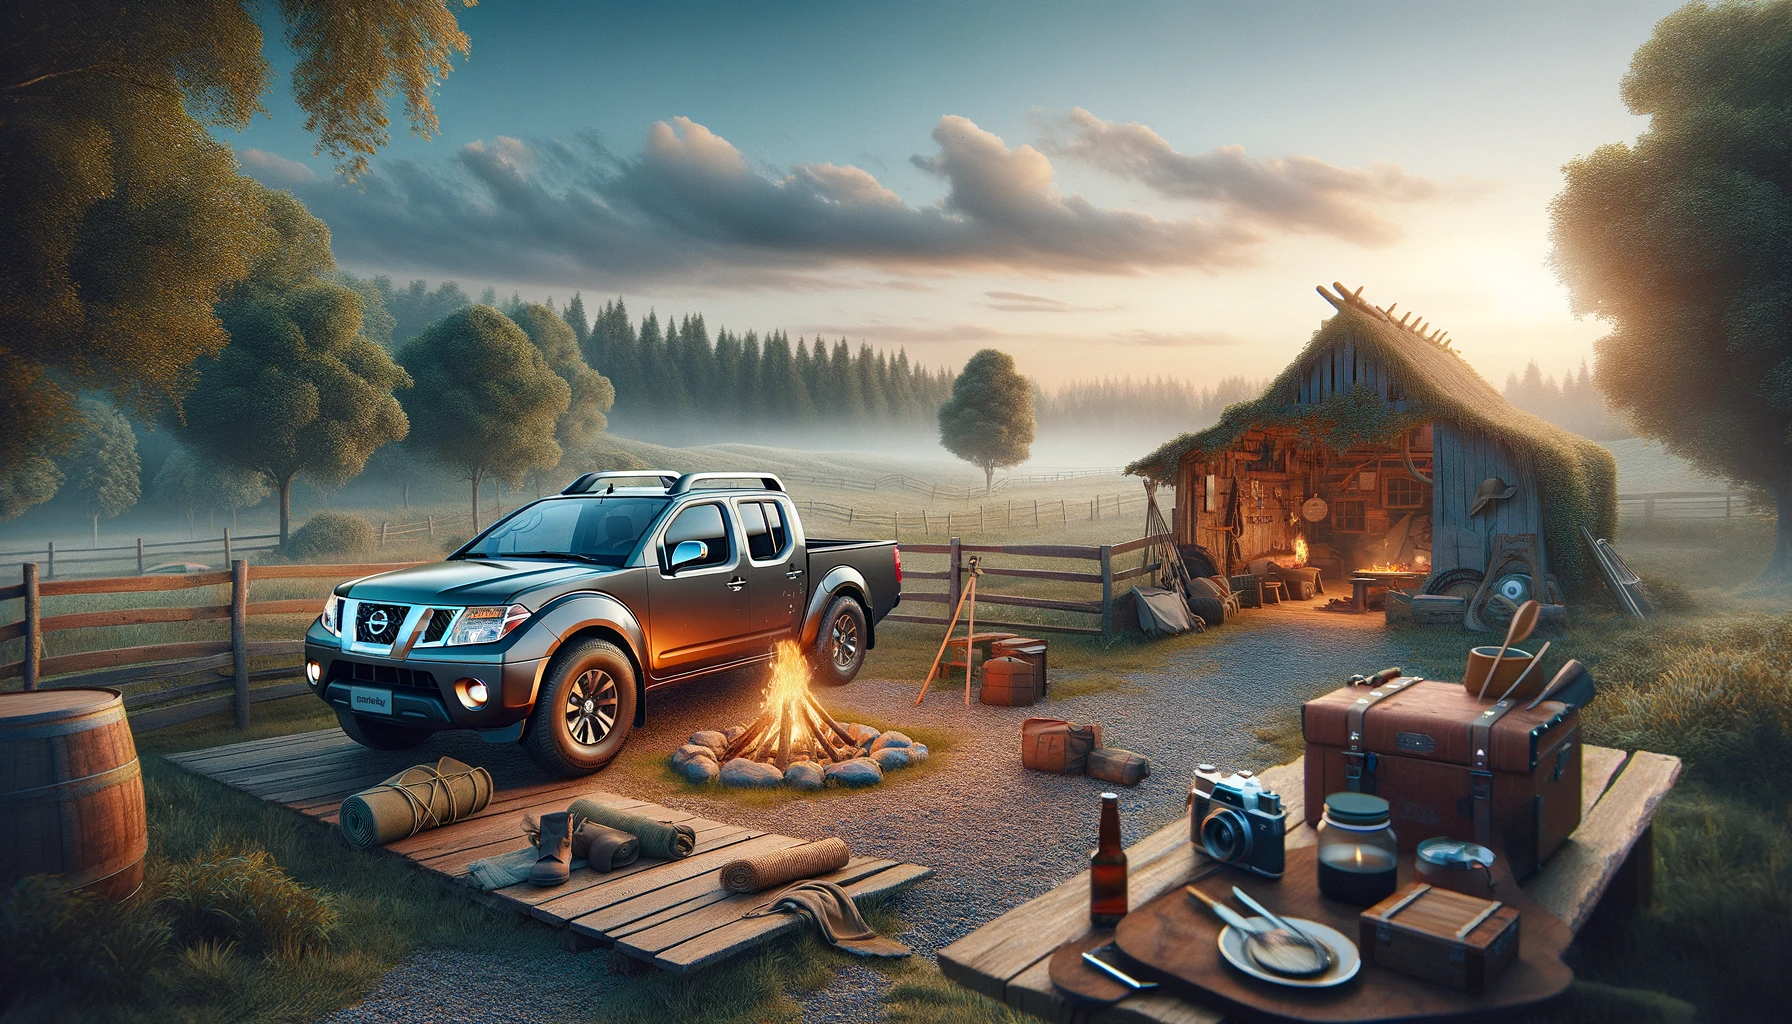 Rural and Outdoor Lifestyle with the Frontier SV